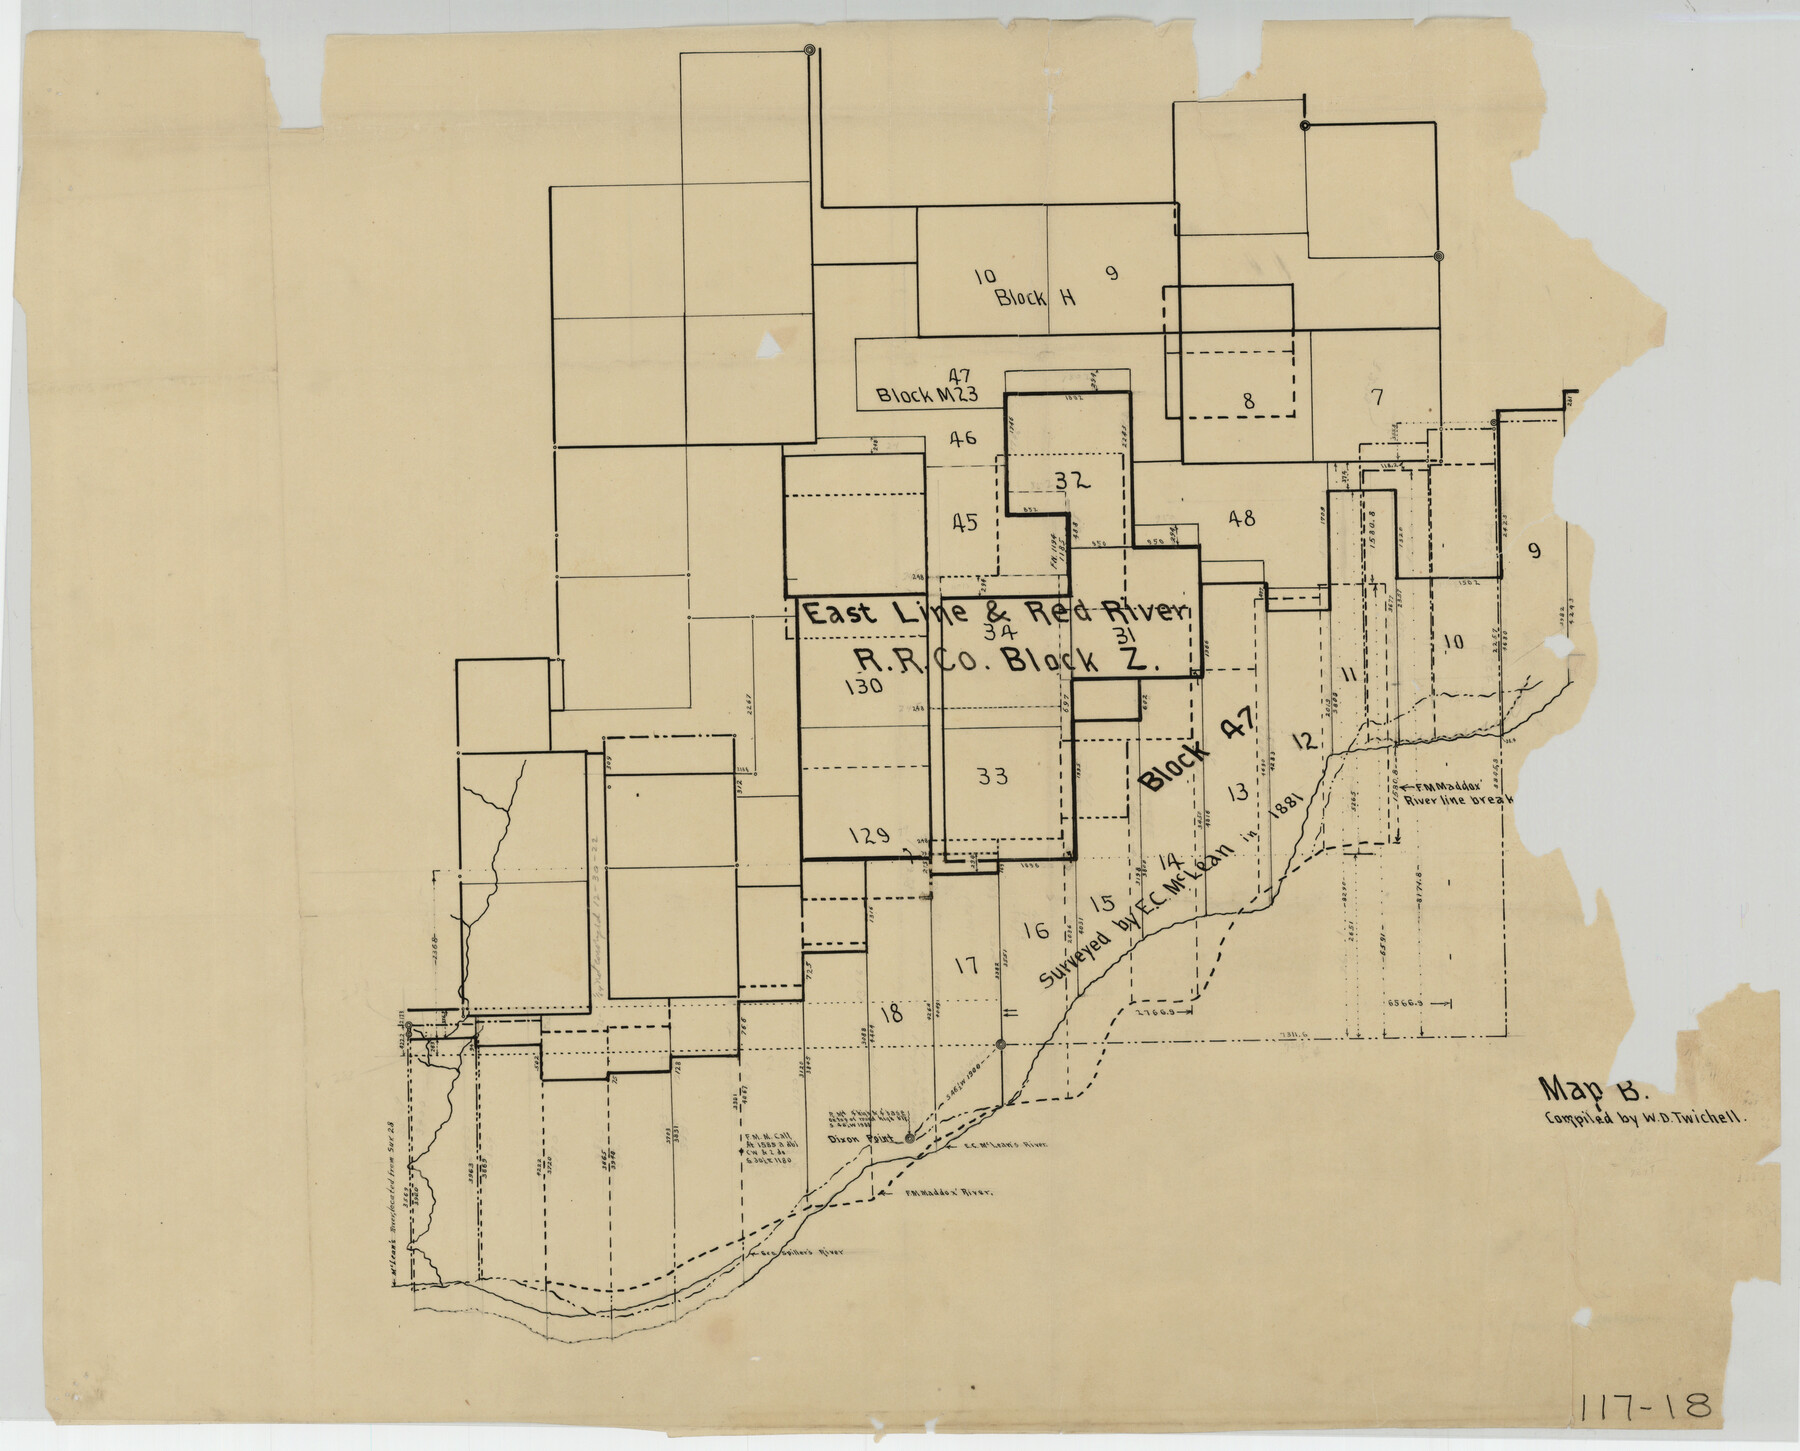 92974, [H. & T. C. Block  47, East Line and Red River RR. Co. Block Z and vicinity], Twichell Survey Records